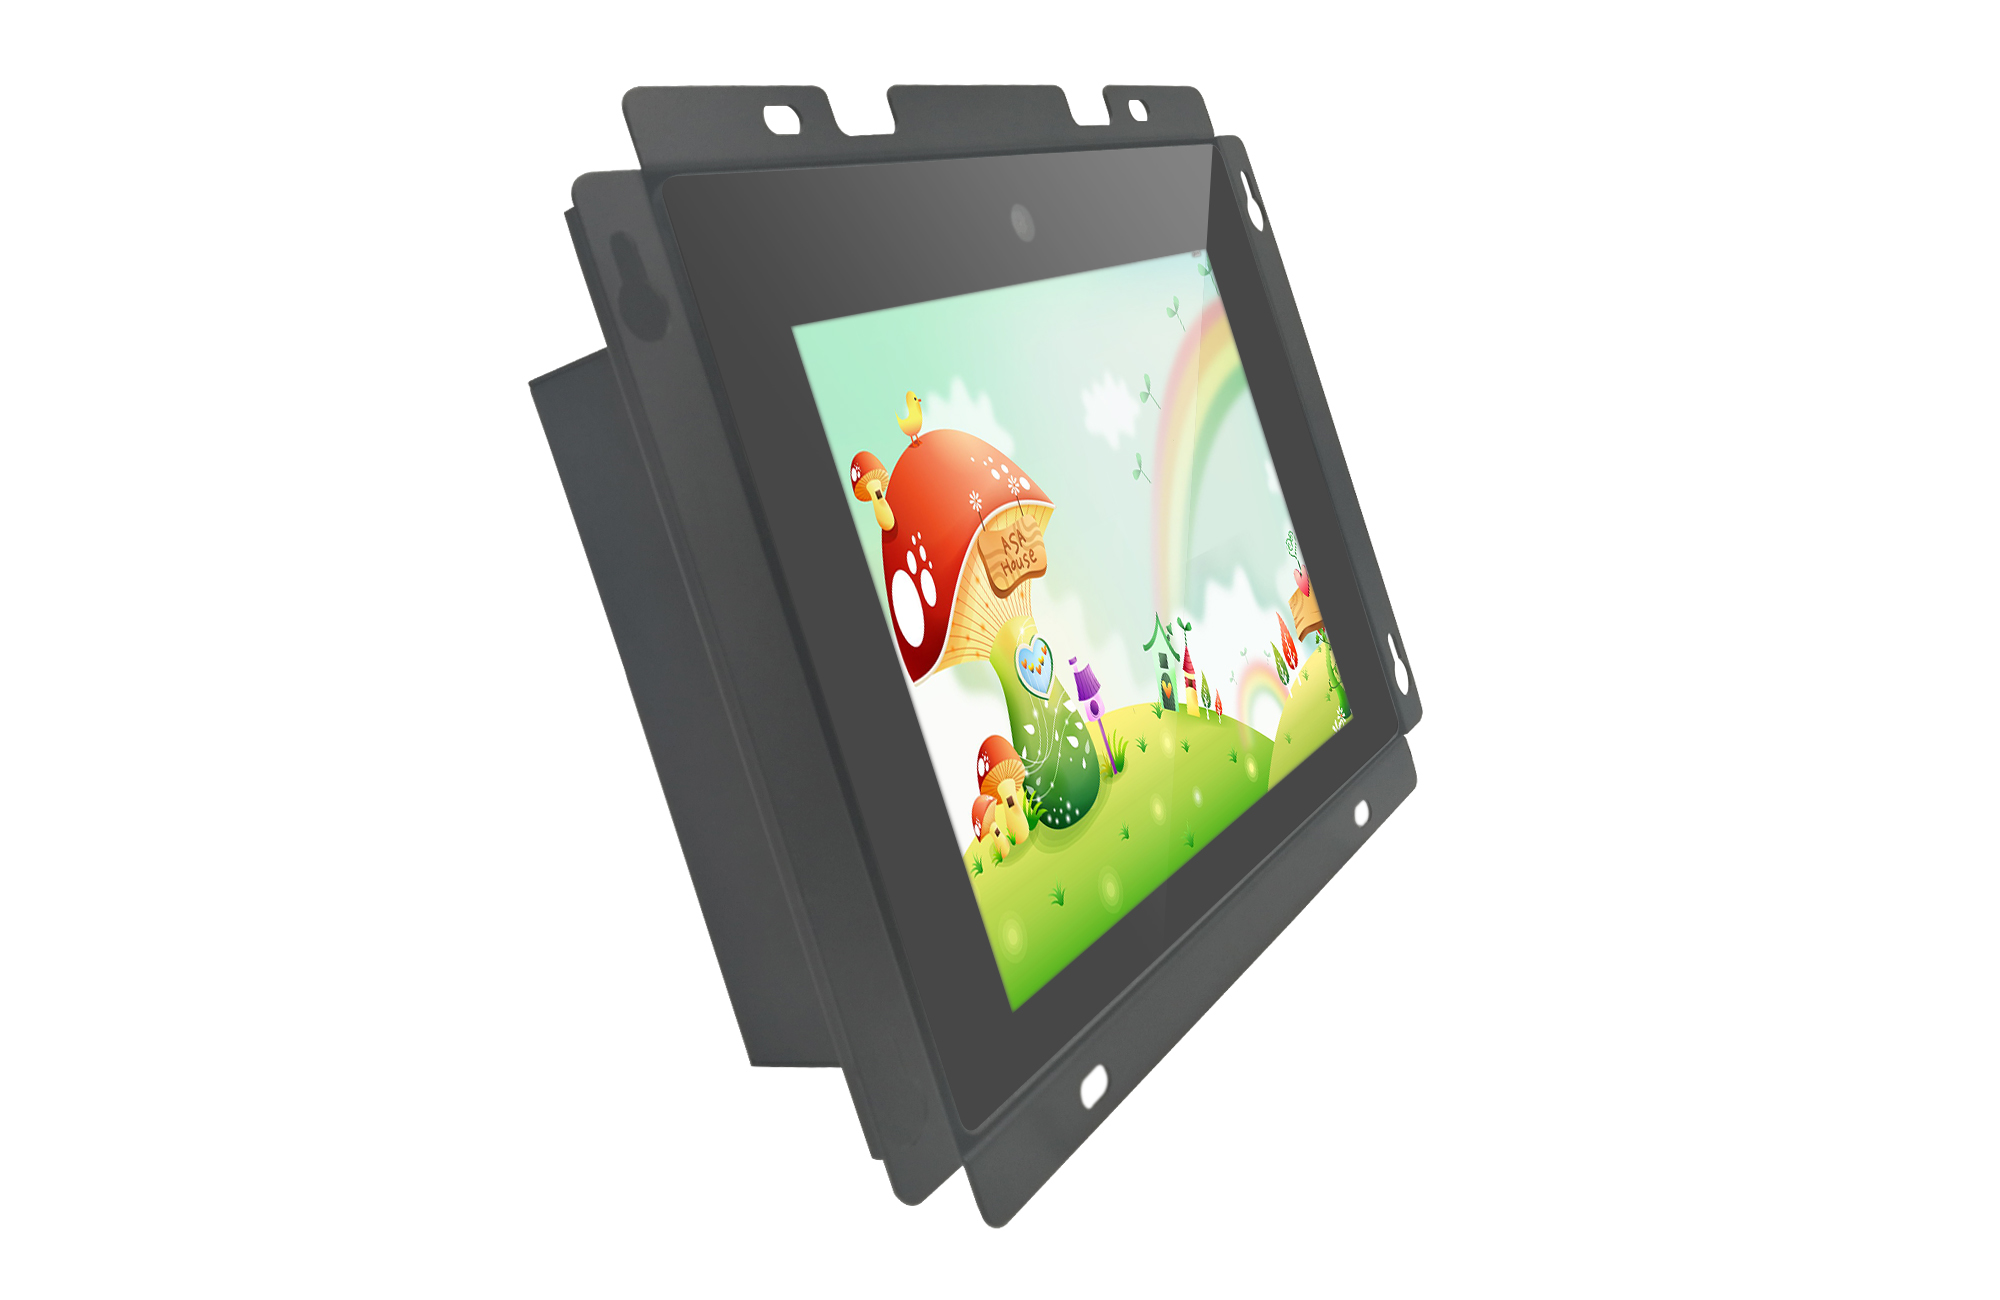 8.4 Inch Android Based All-In-One Panel PC